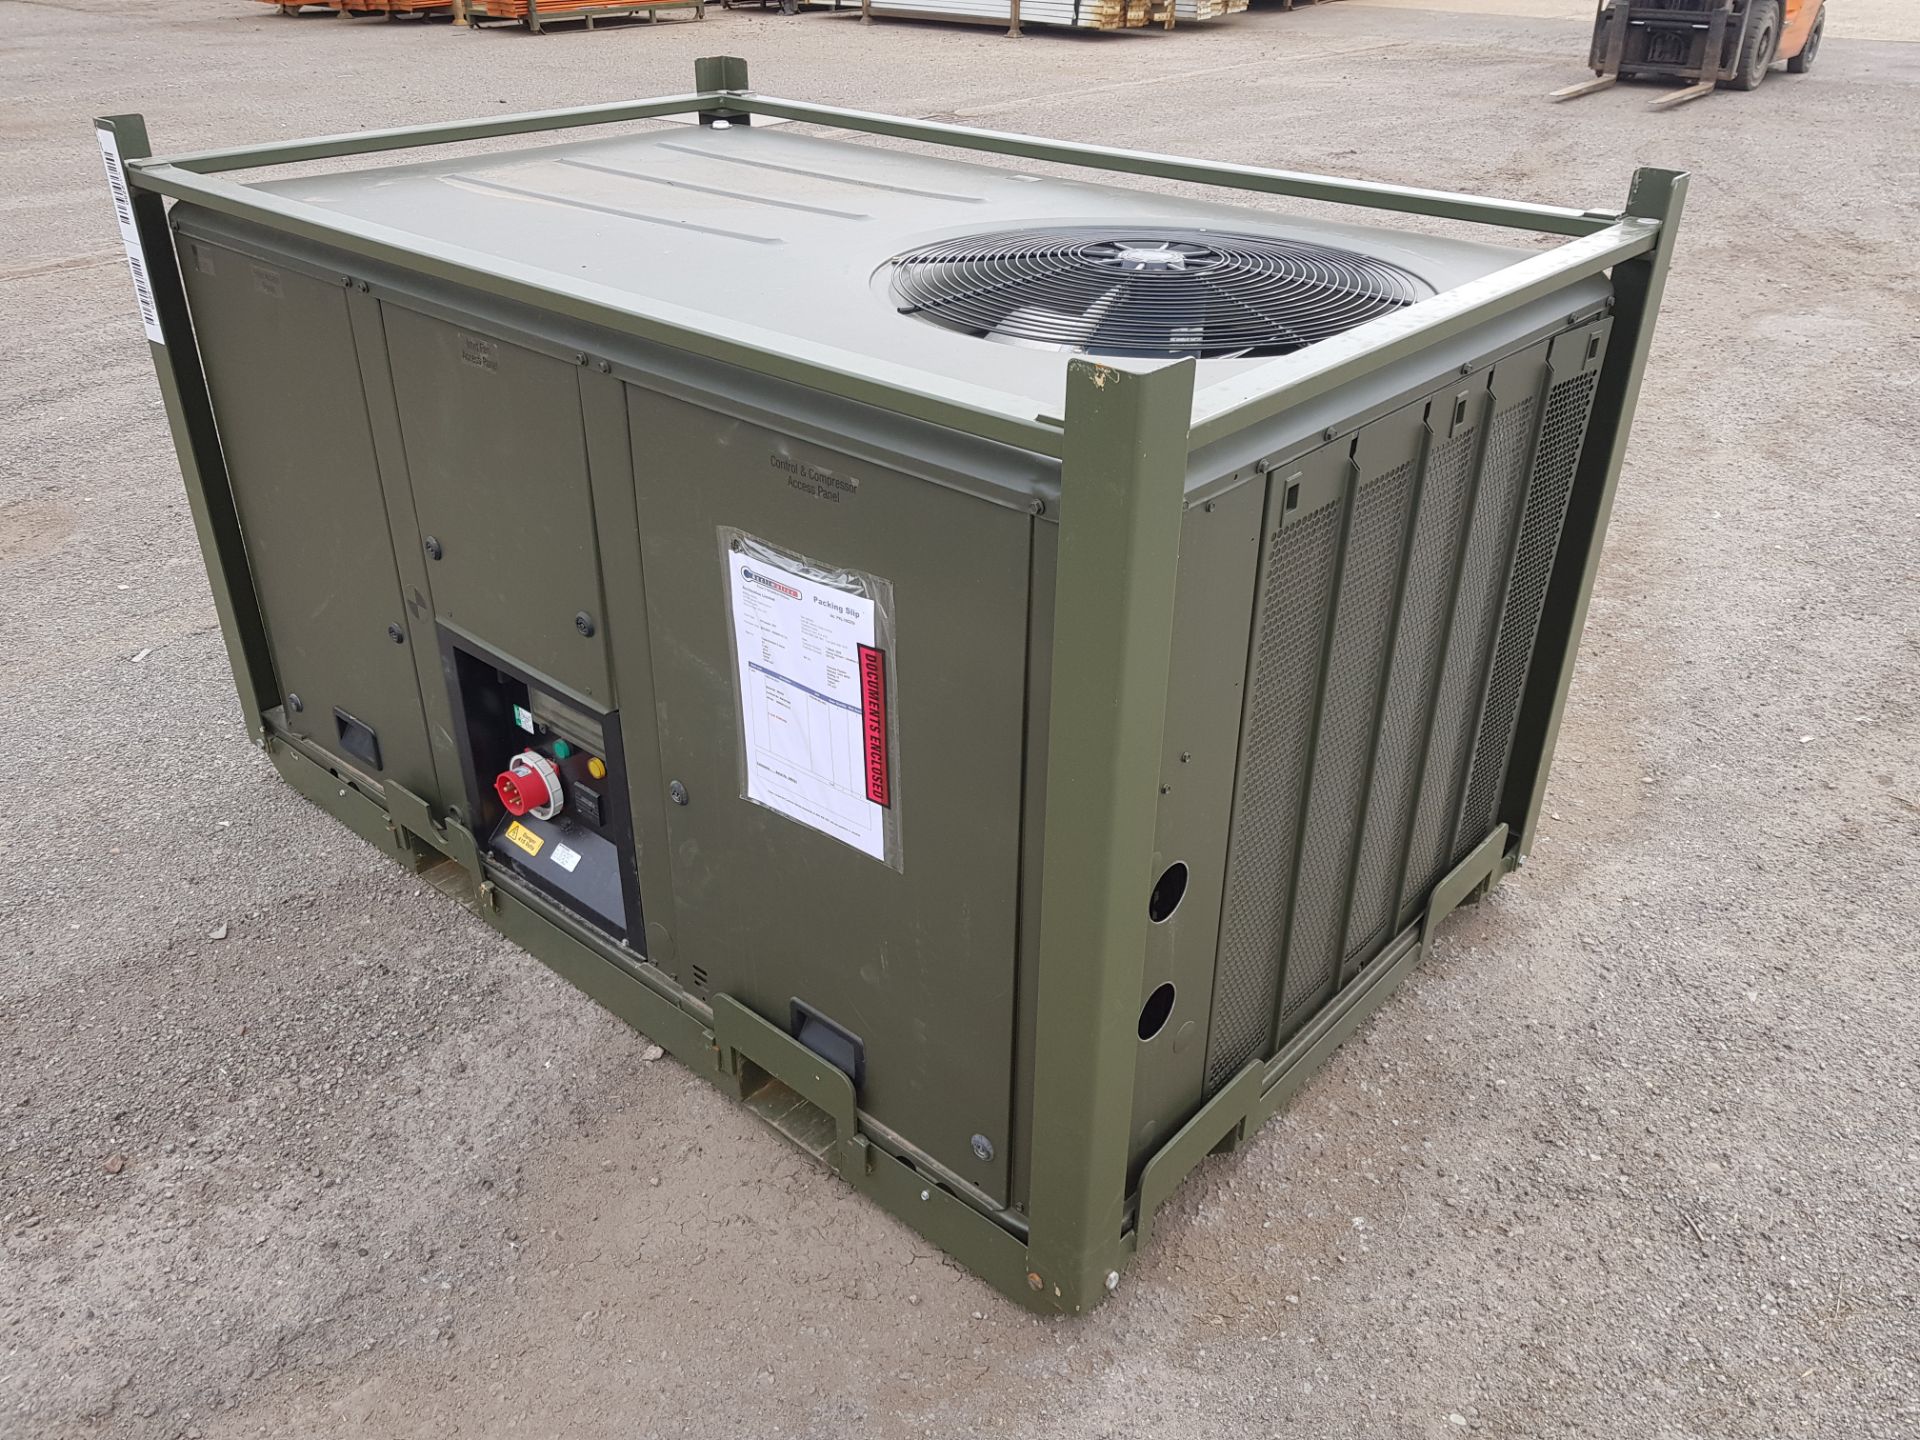 Acclimatise 15kW cooling or heating Environment Control Unit (ECU) - W 1810 x D 1180 x H 1010mm - Image 2 of 3